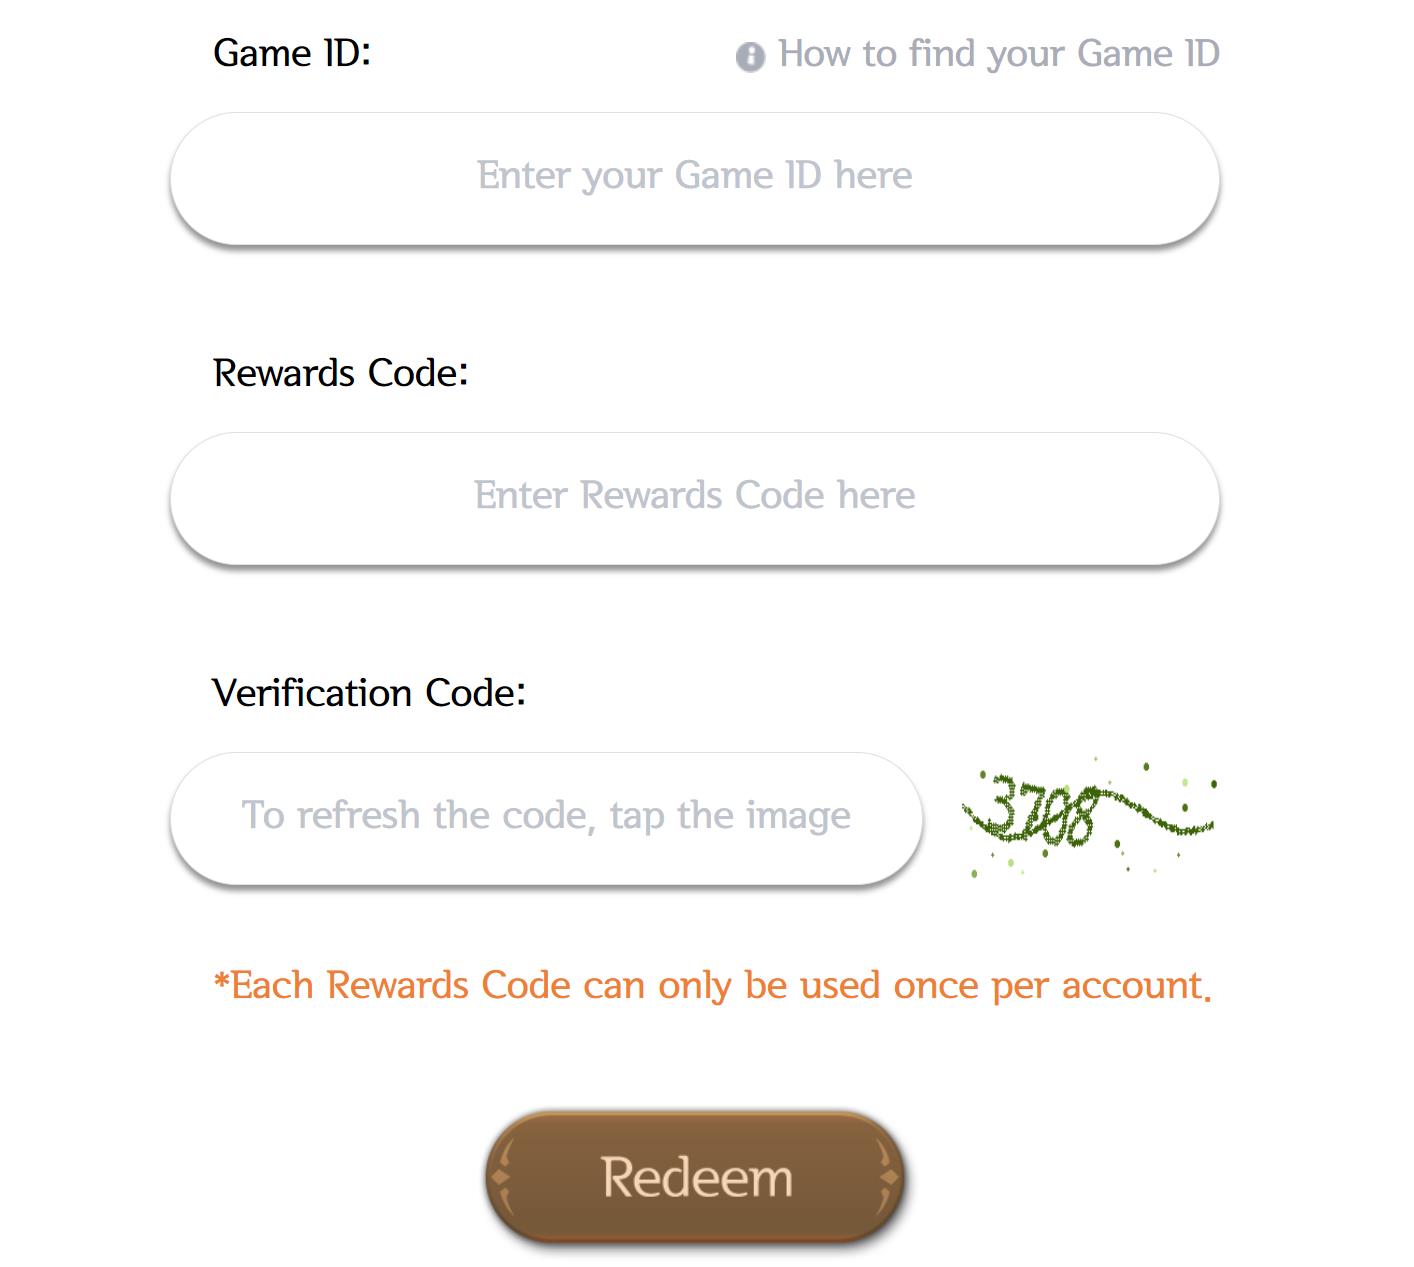 souls code ✓ valid gift codes for souls 